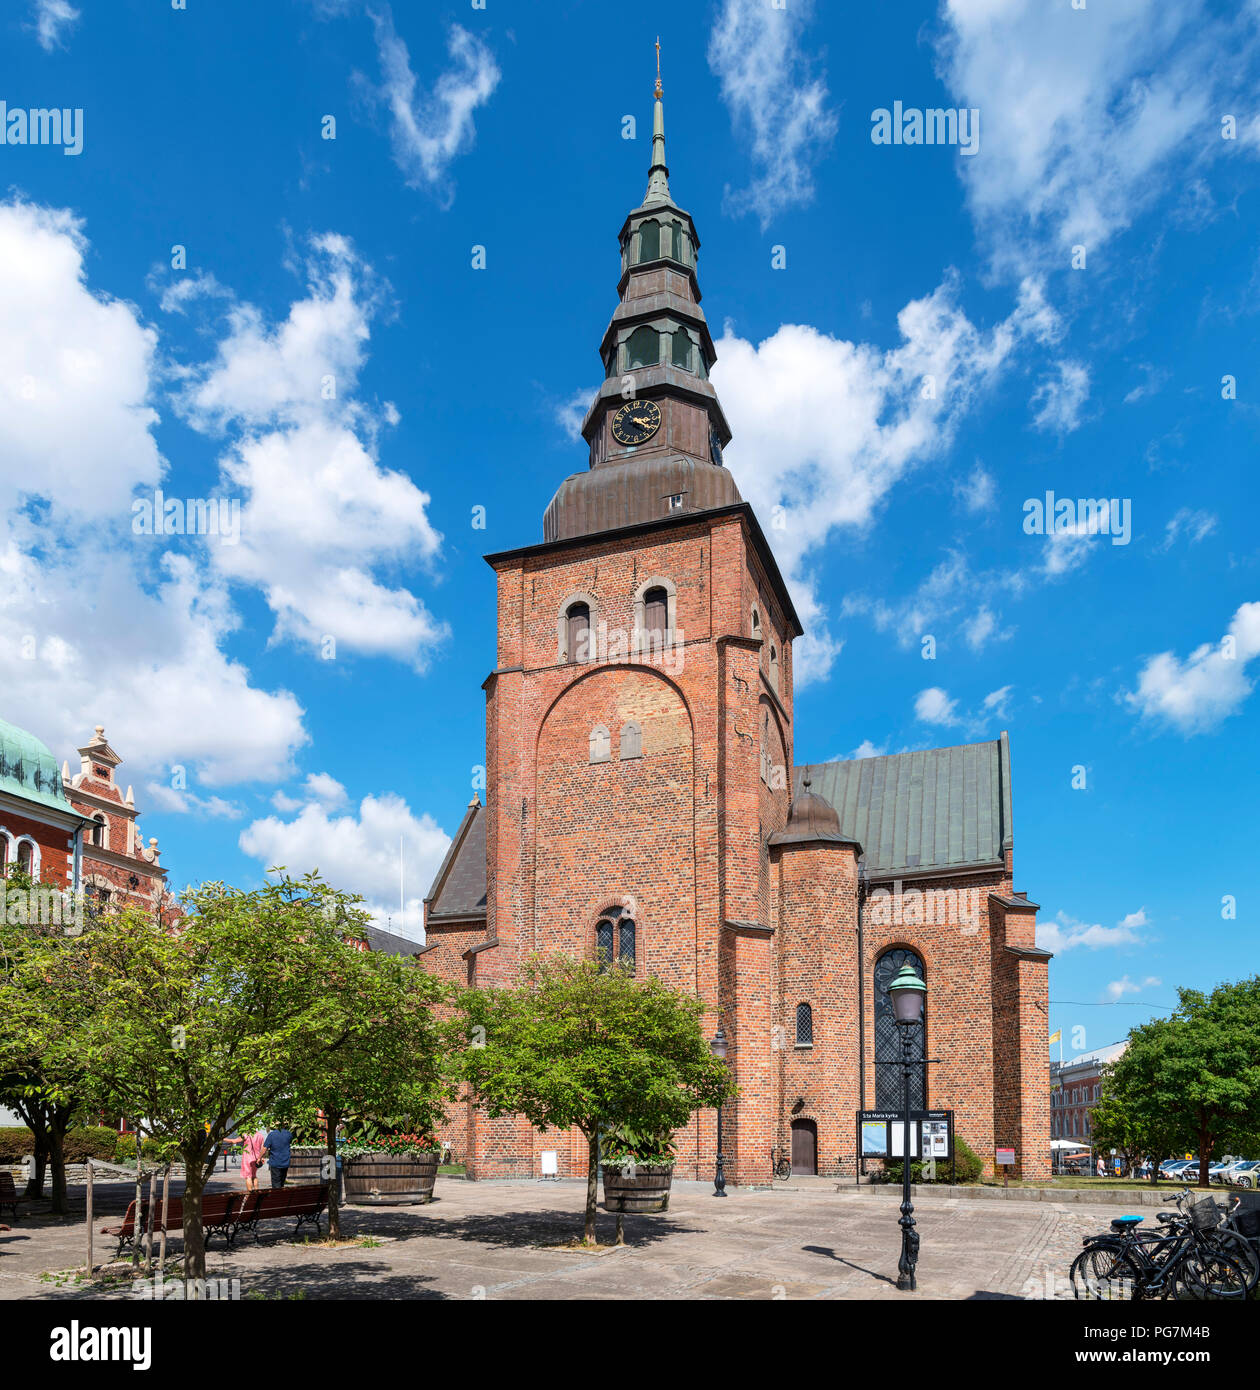 St Mary's Church (Sankta Maria Kyrka)  in the old market town of Ystad, Scania, Sweden Stock Photo